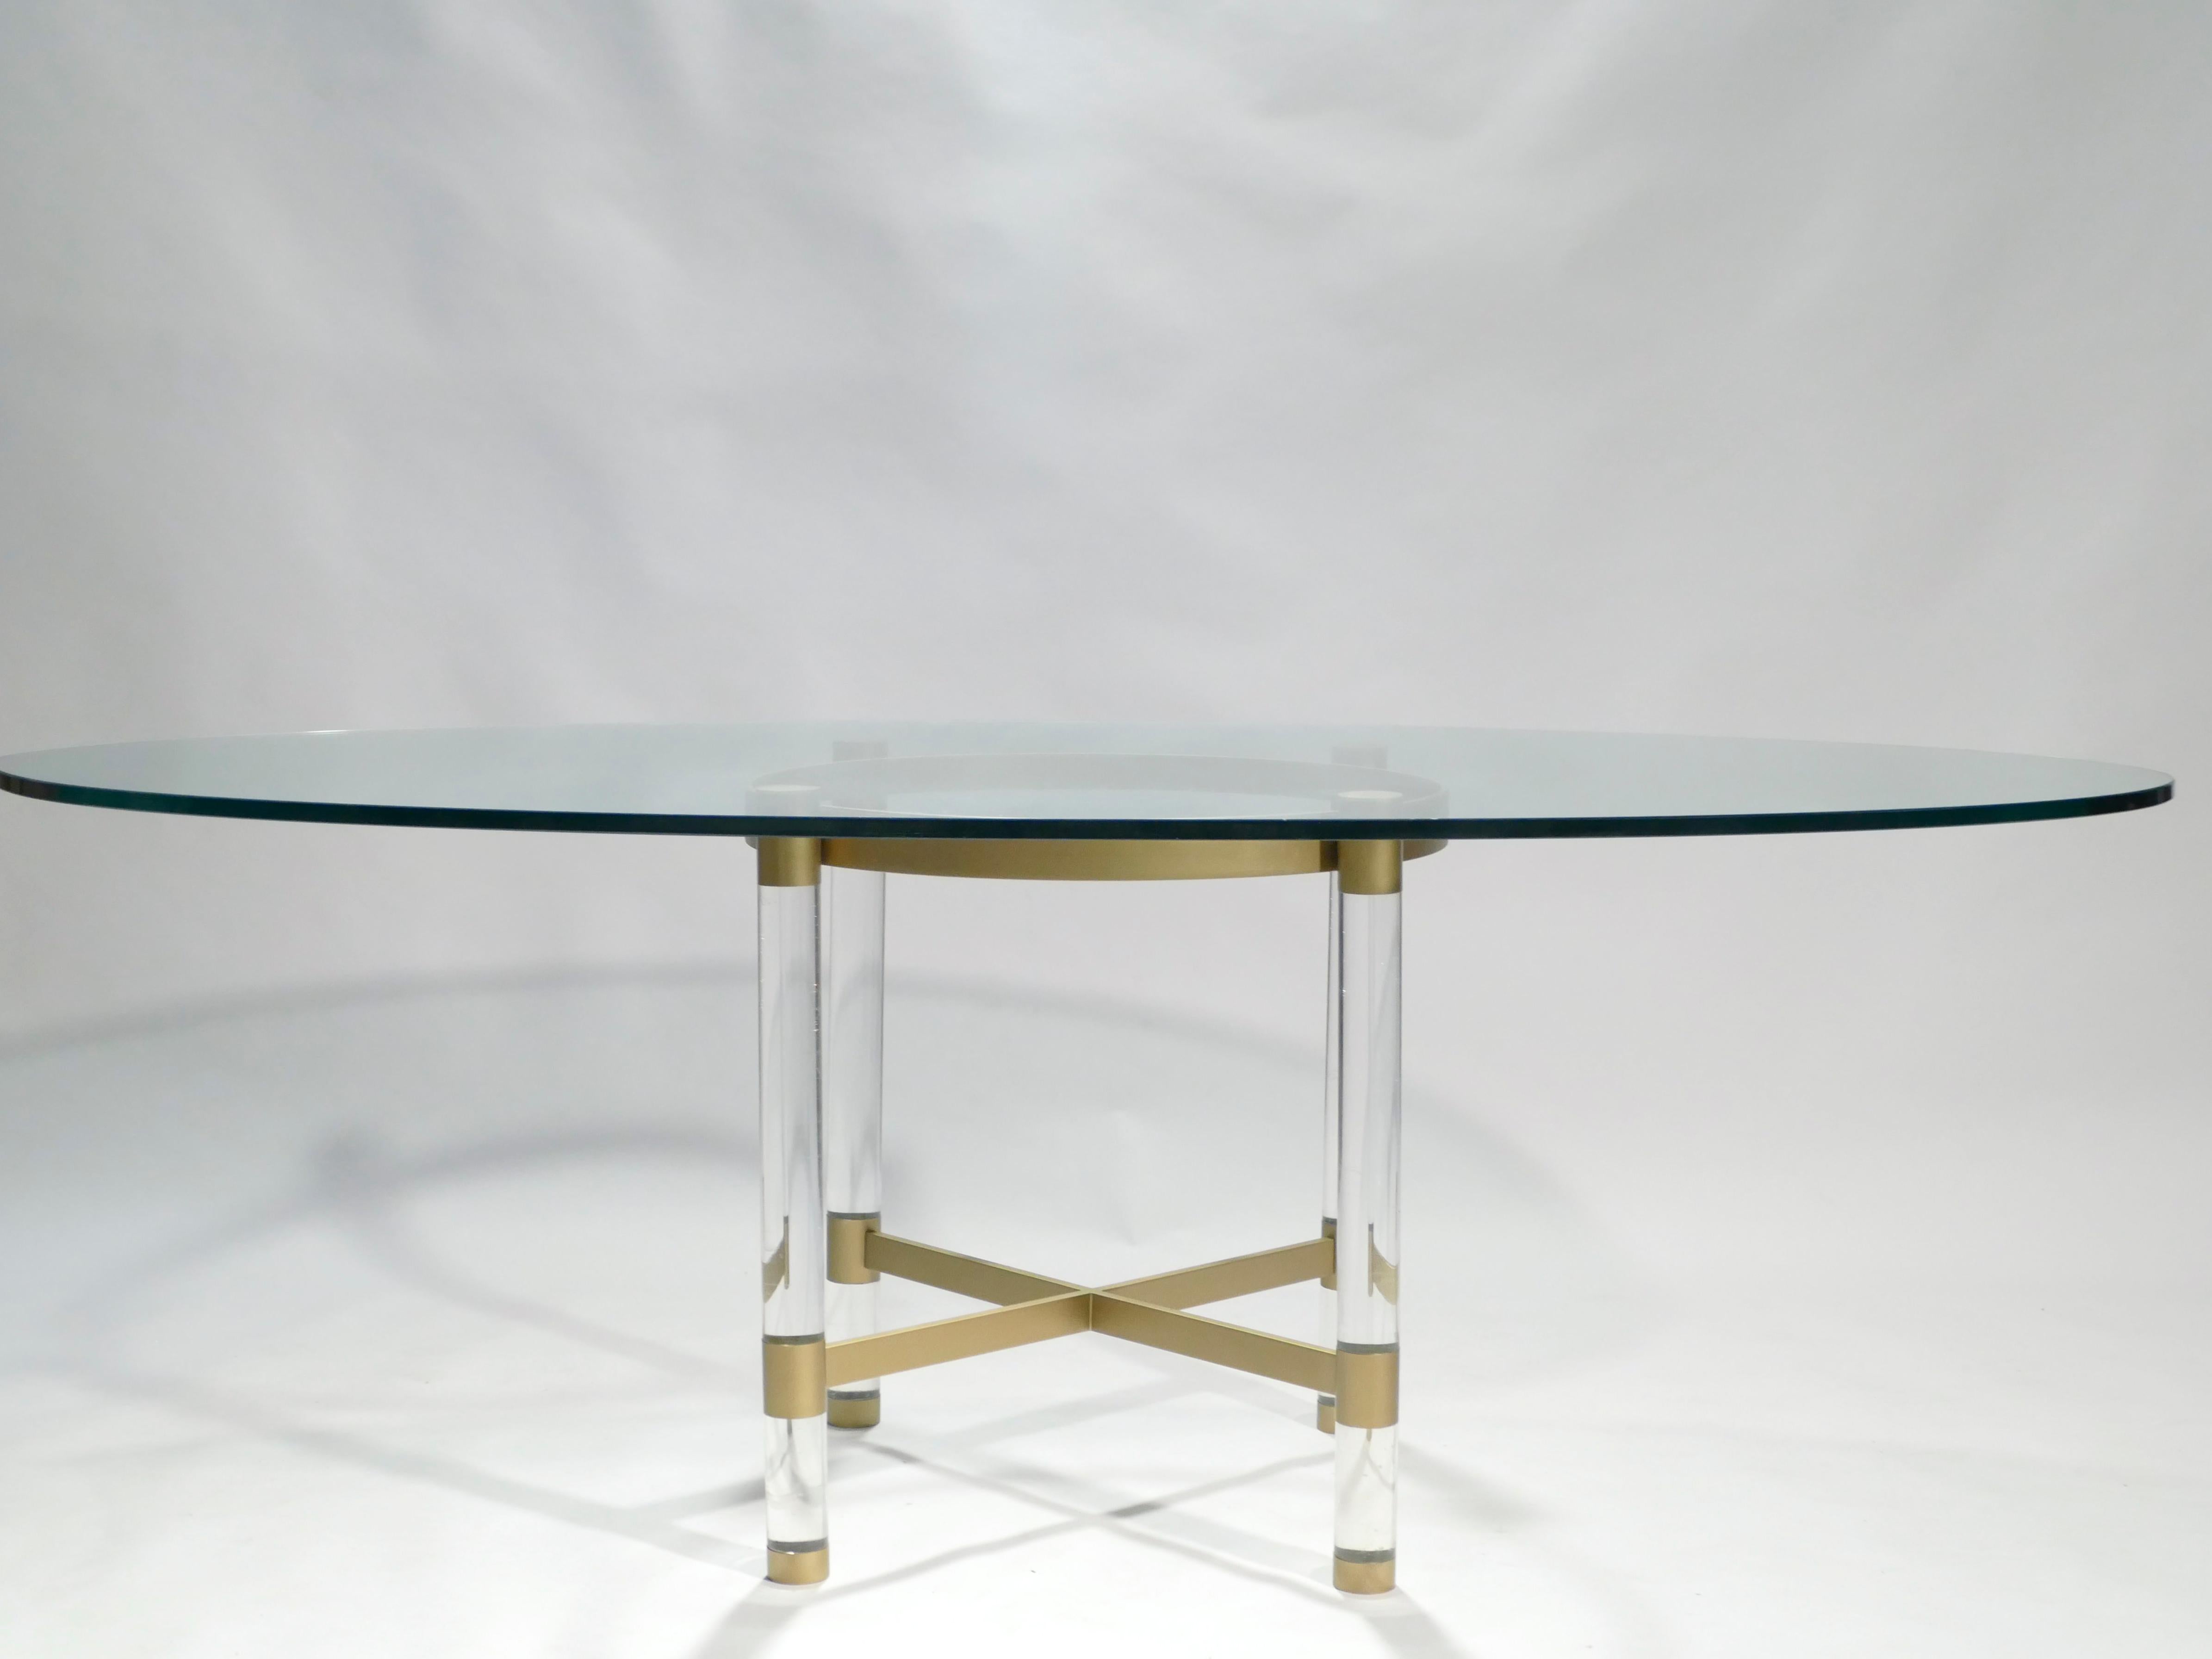 A rare find, this dining table exemplifies the designs by Sandro Petti for company Metalarte around 1970. A thick transparent glass surface has a striking oblong shape and rests atop Lucite and matte brass legs. Four Lucite columns support a brass